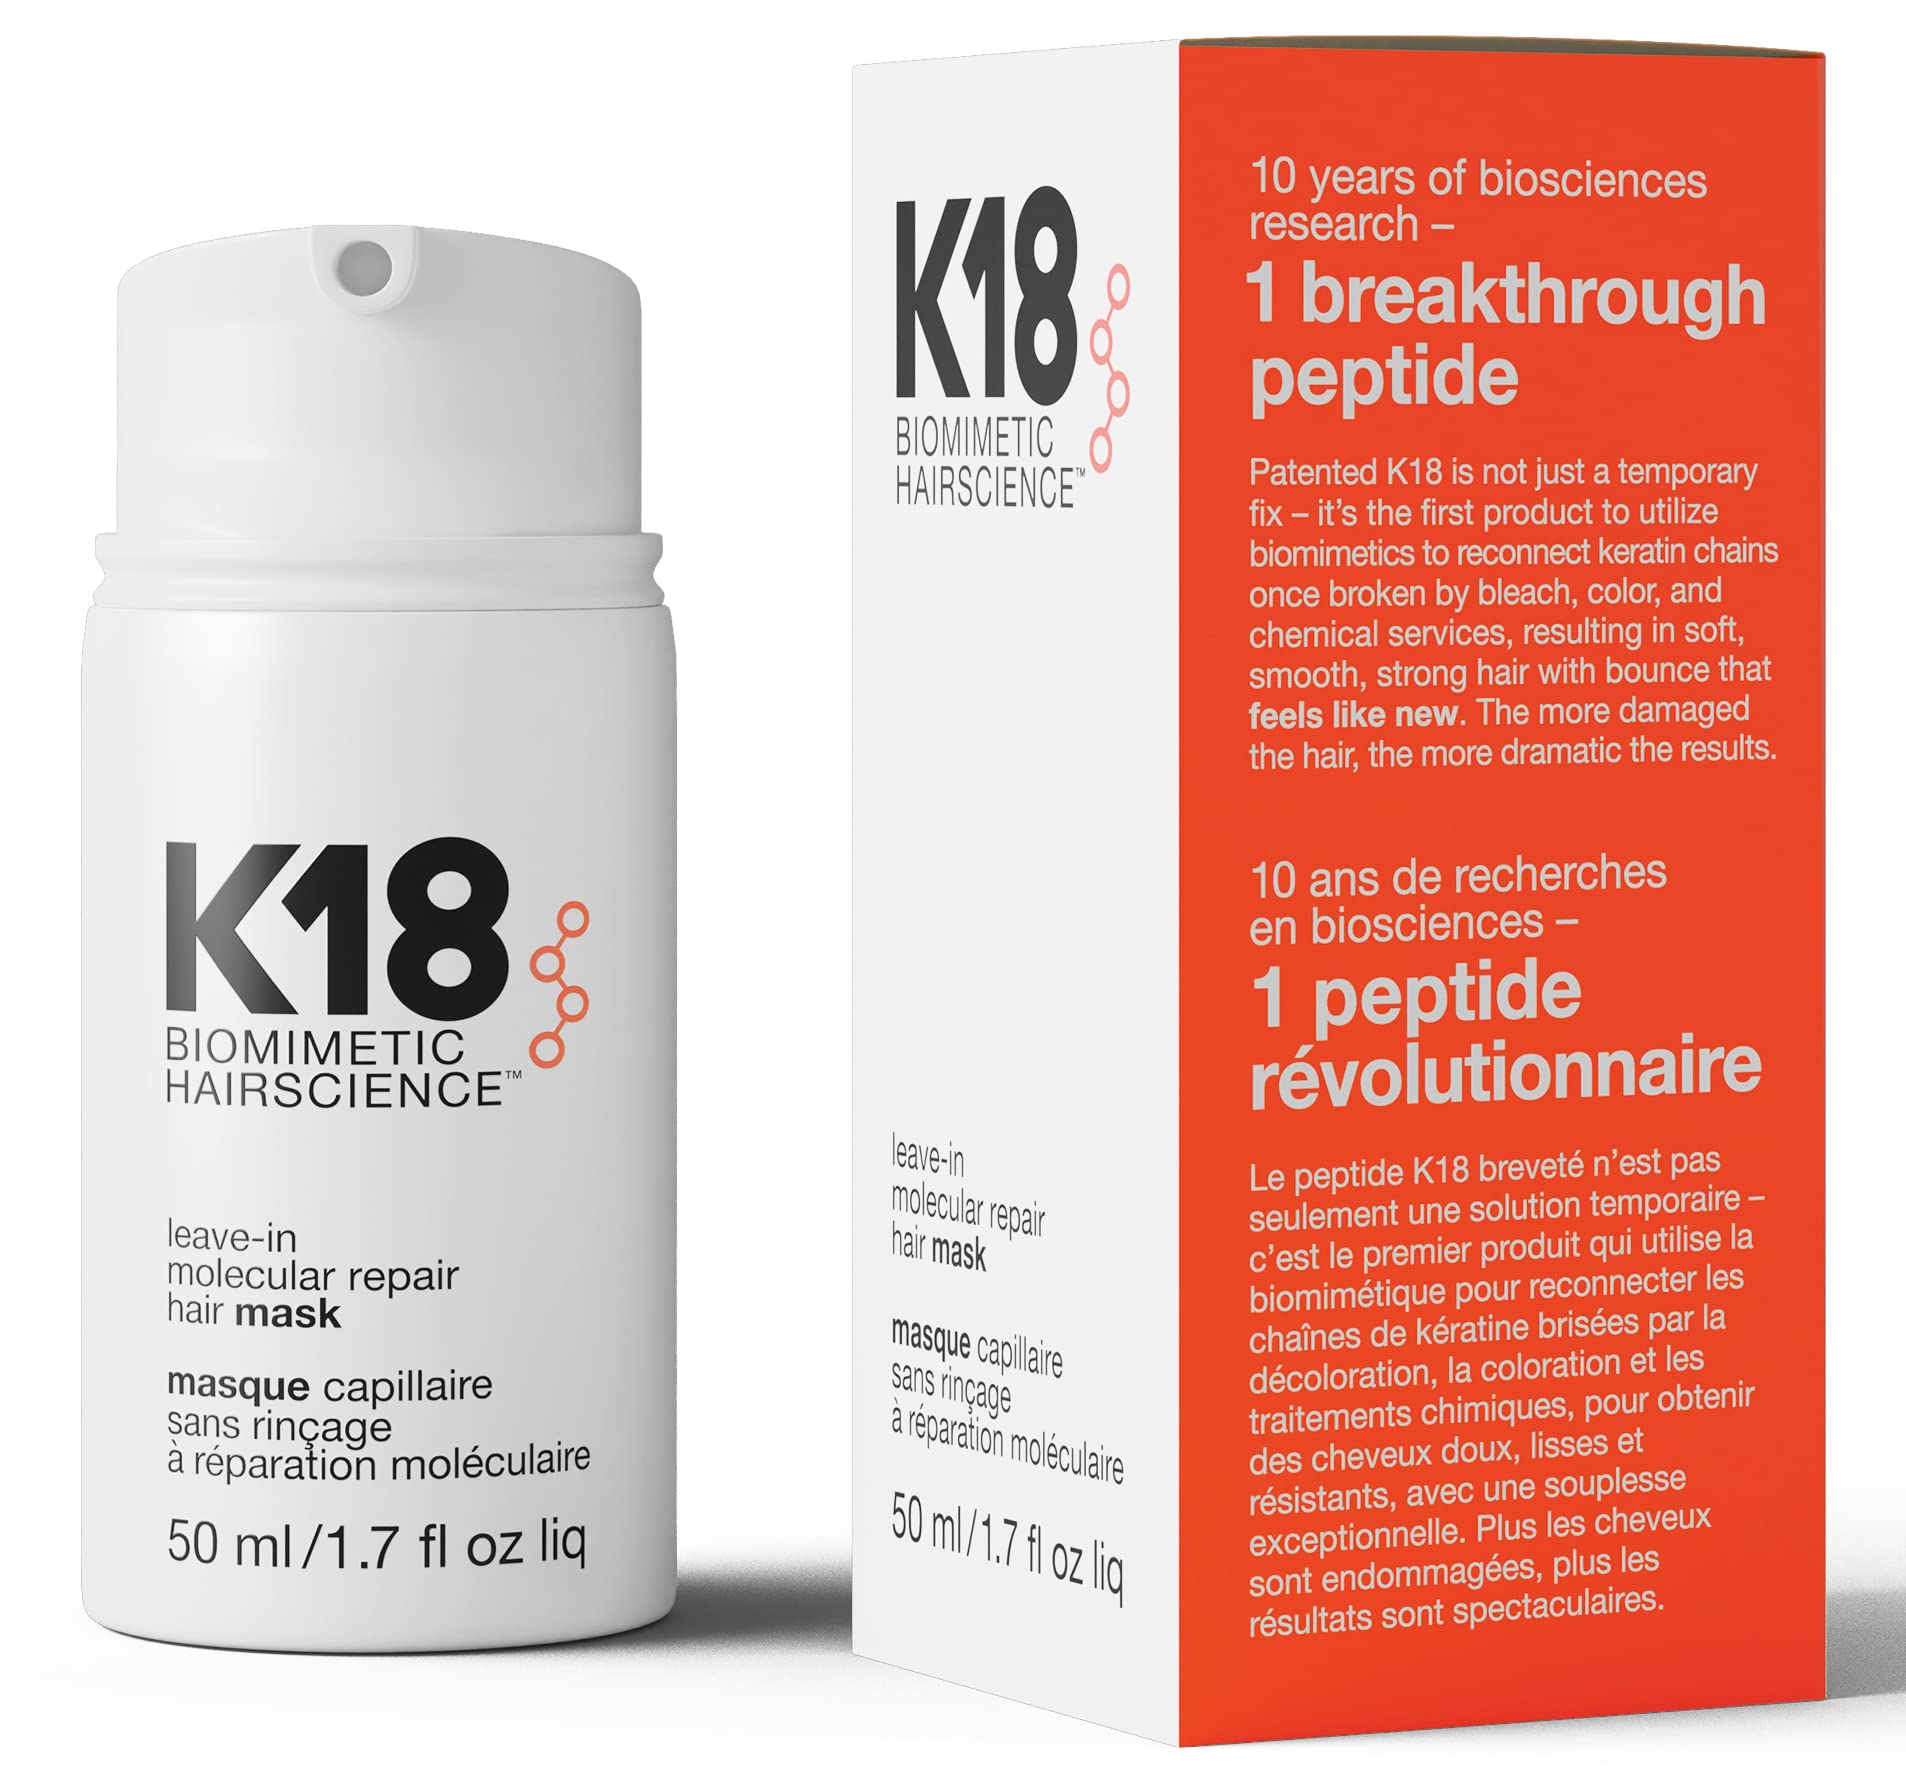 K18 Leave-In Repair Hair Mask Treatment to Repair Dry or Damaged Hair - 4 Minutes to Reverse Hair Damage from Bleach, Color, Chemical Services and Heat, 50 ml